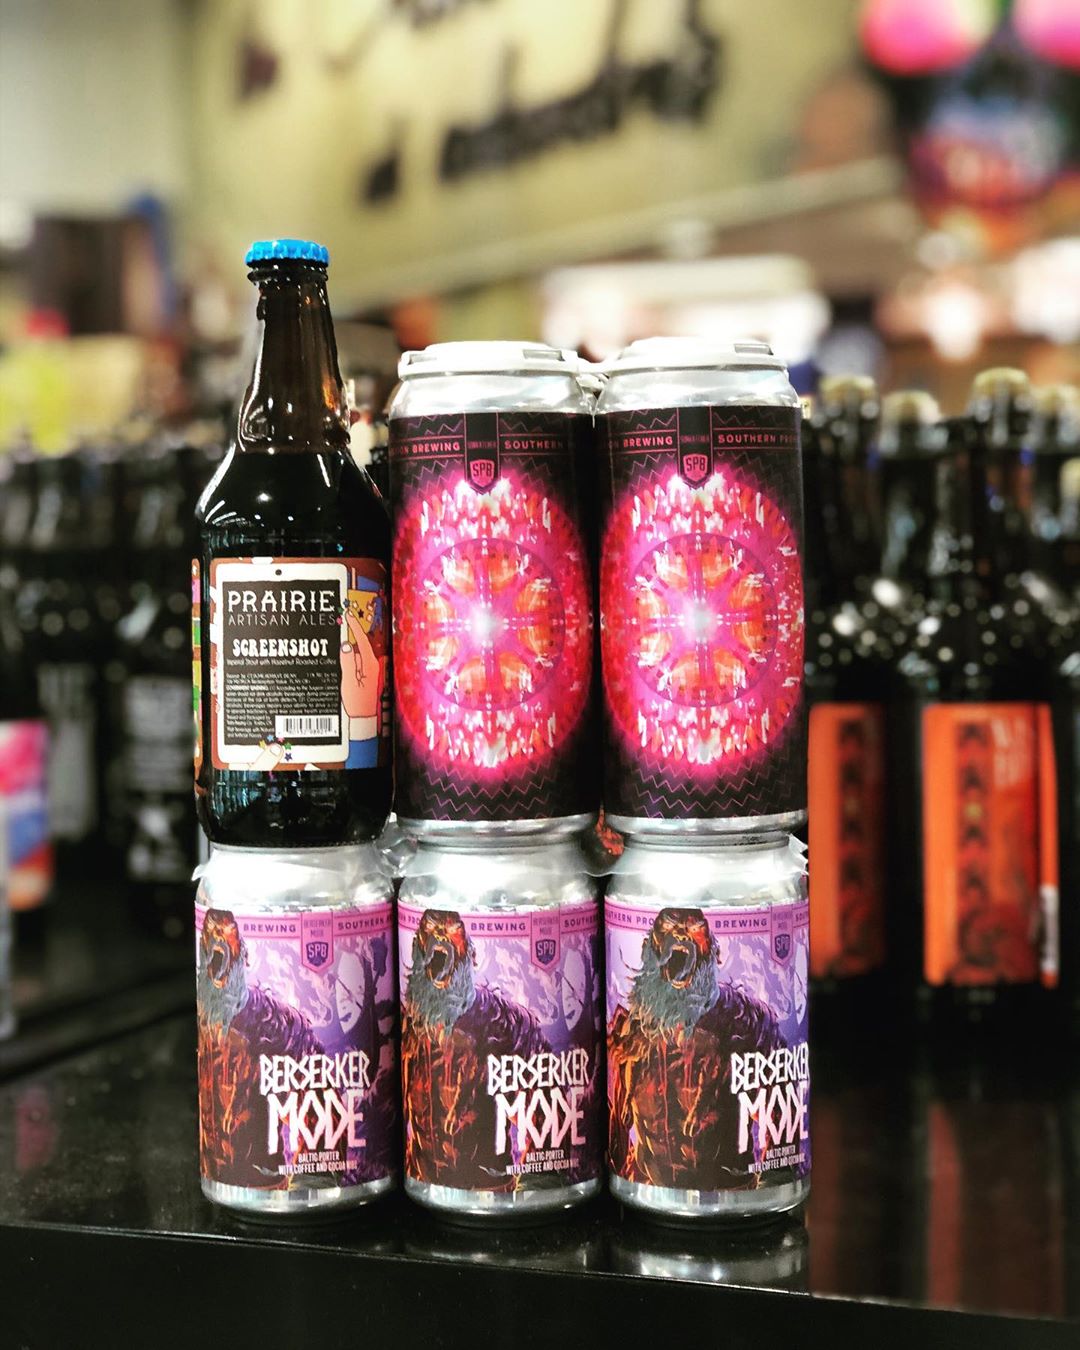 But wait… there’s more at our Perkins Rd location! @soprobrewco @prairieales #beer #haze #drinklocalish #hazelnut